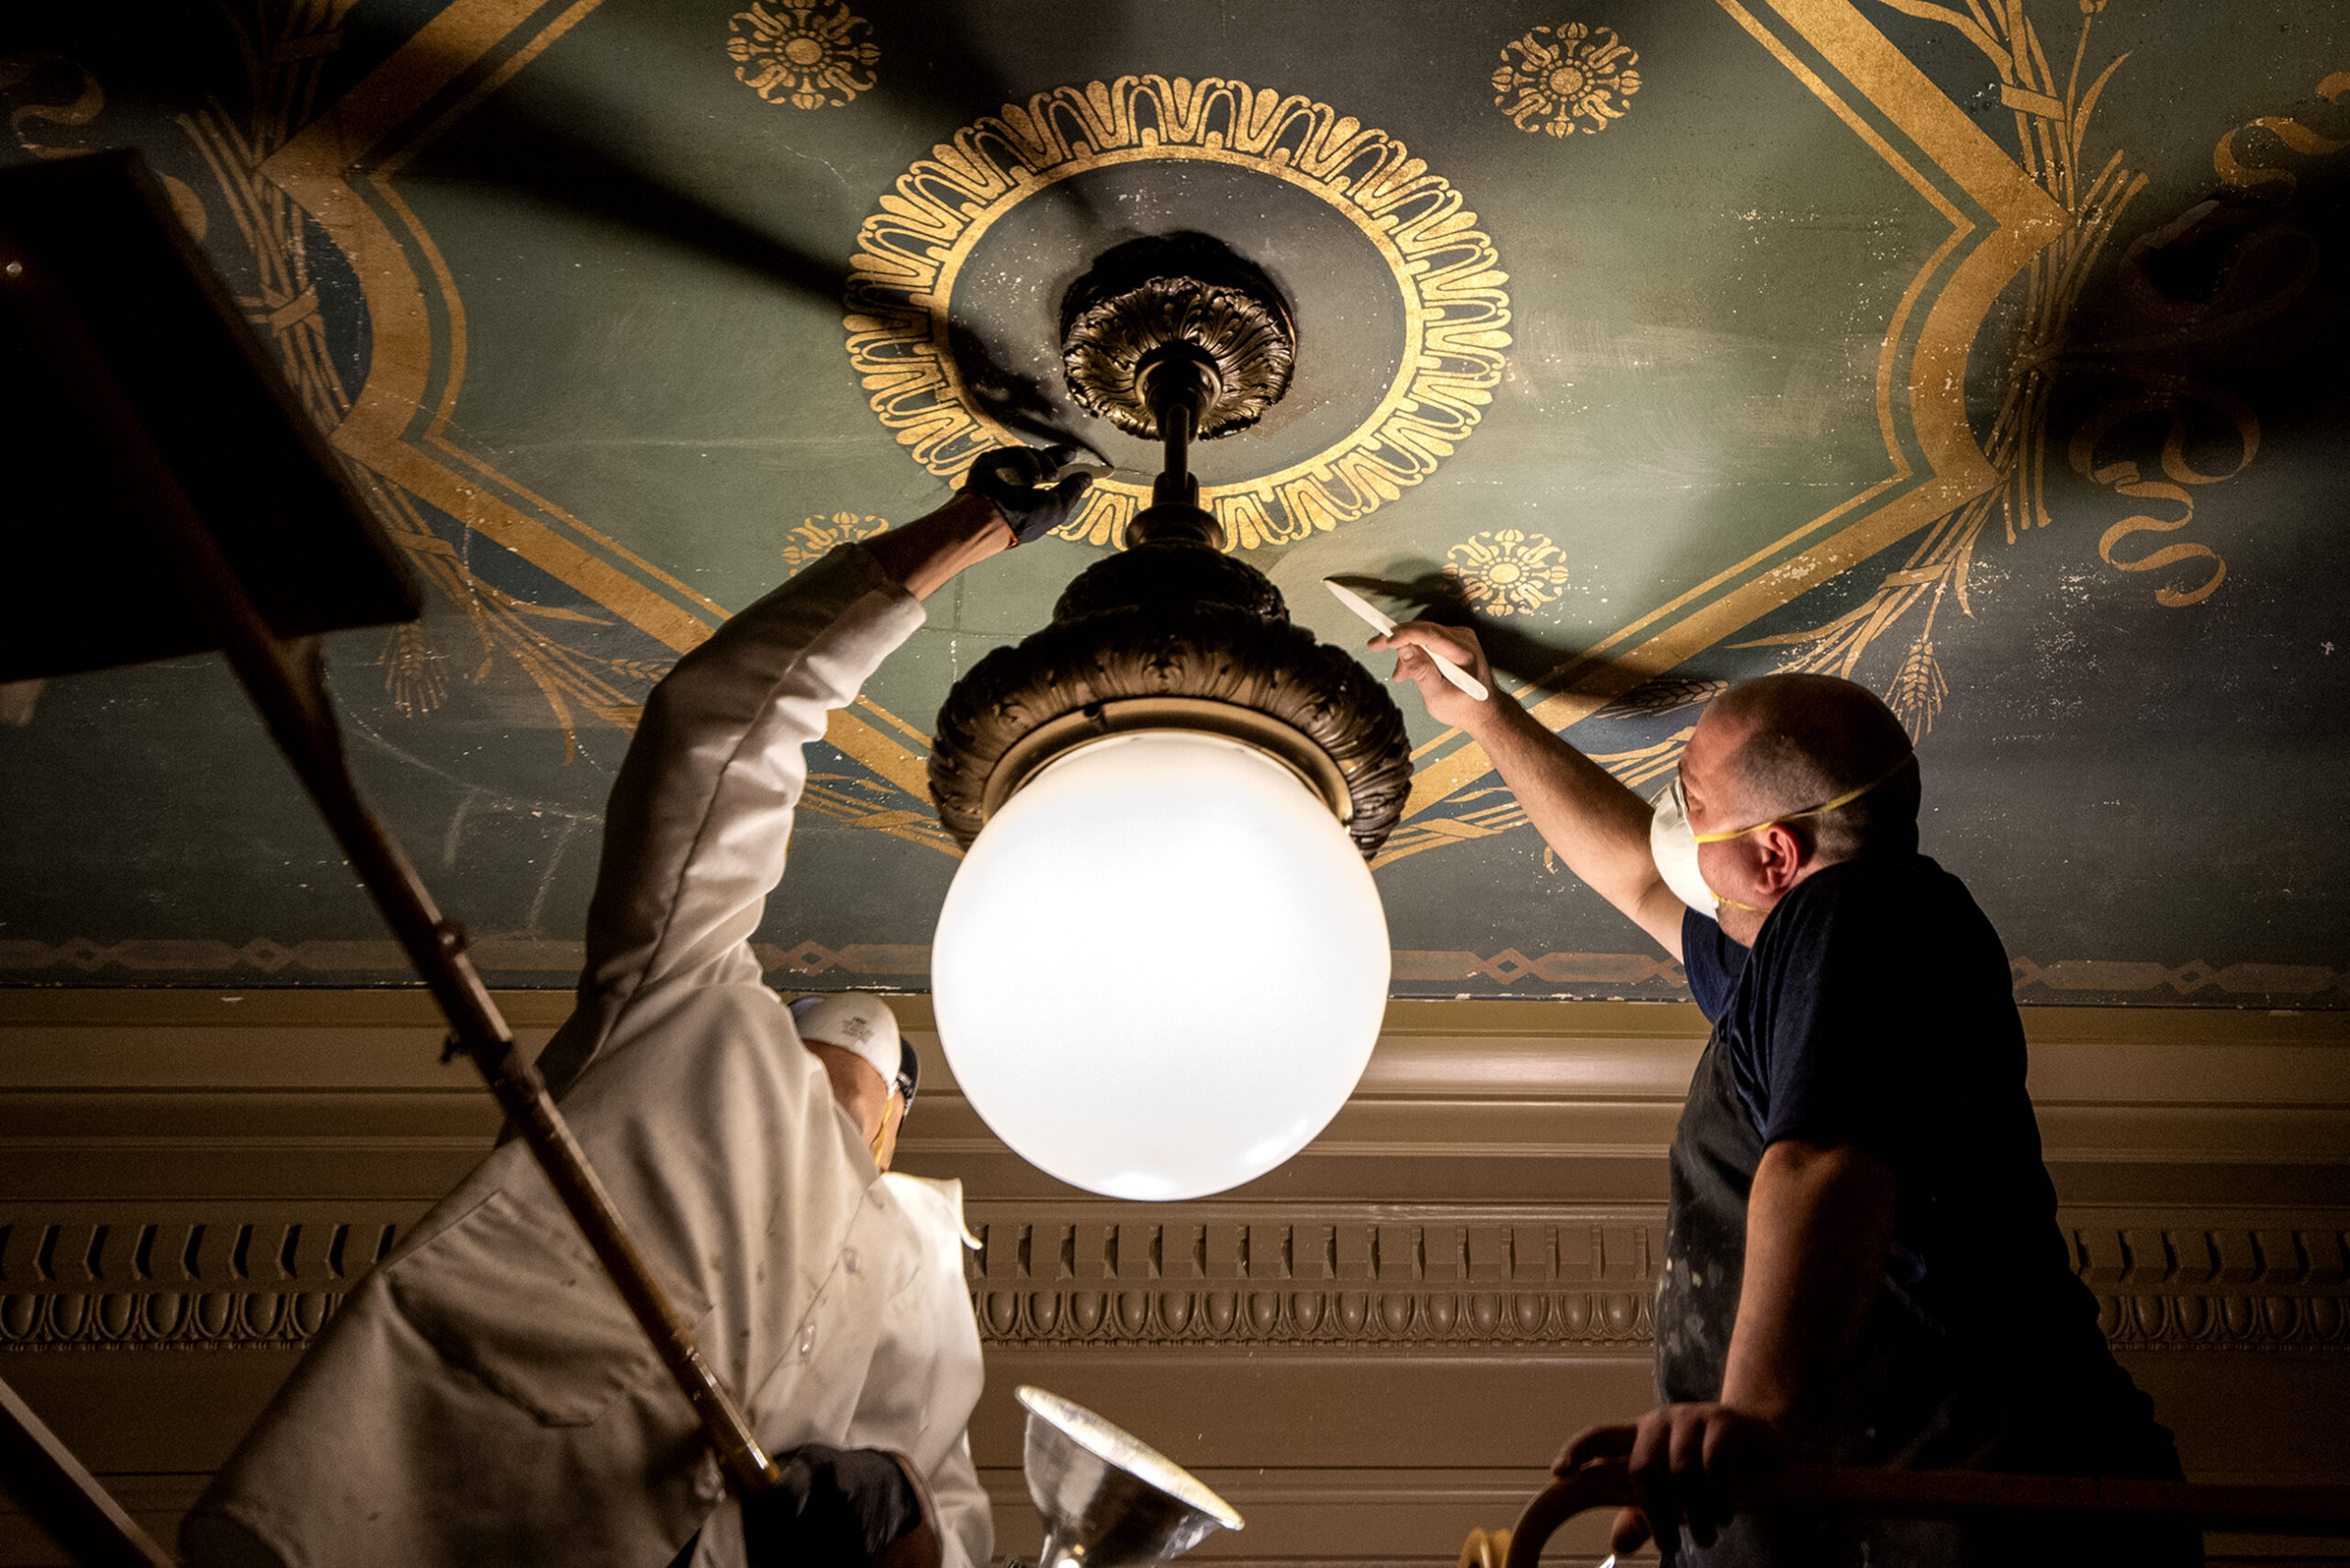 Two workers wear masks as they use a tool to scrape a decoratively painted ceiling.